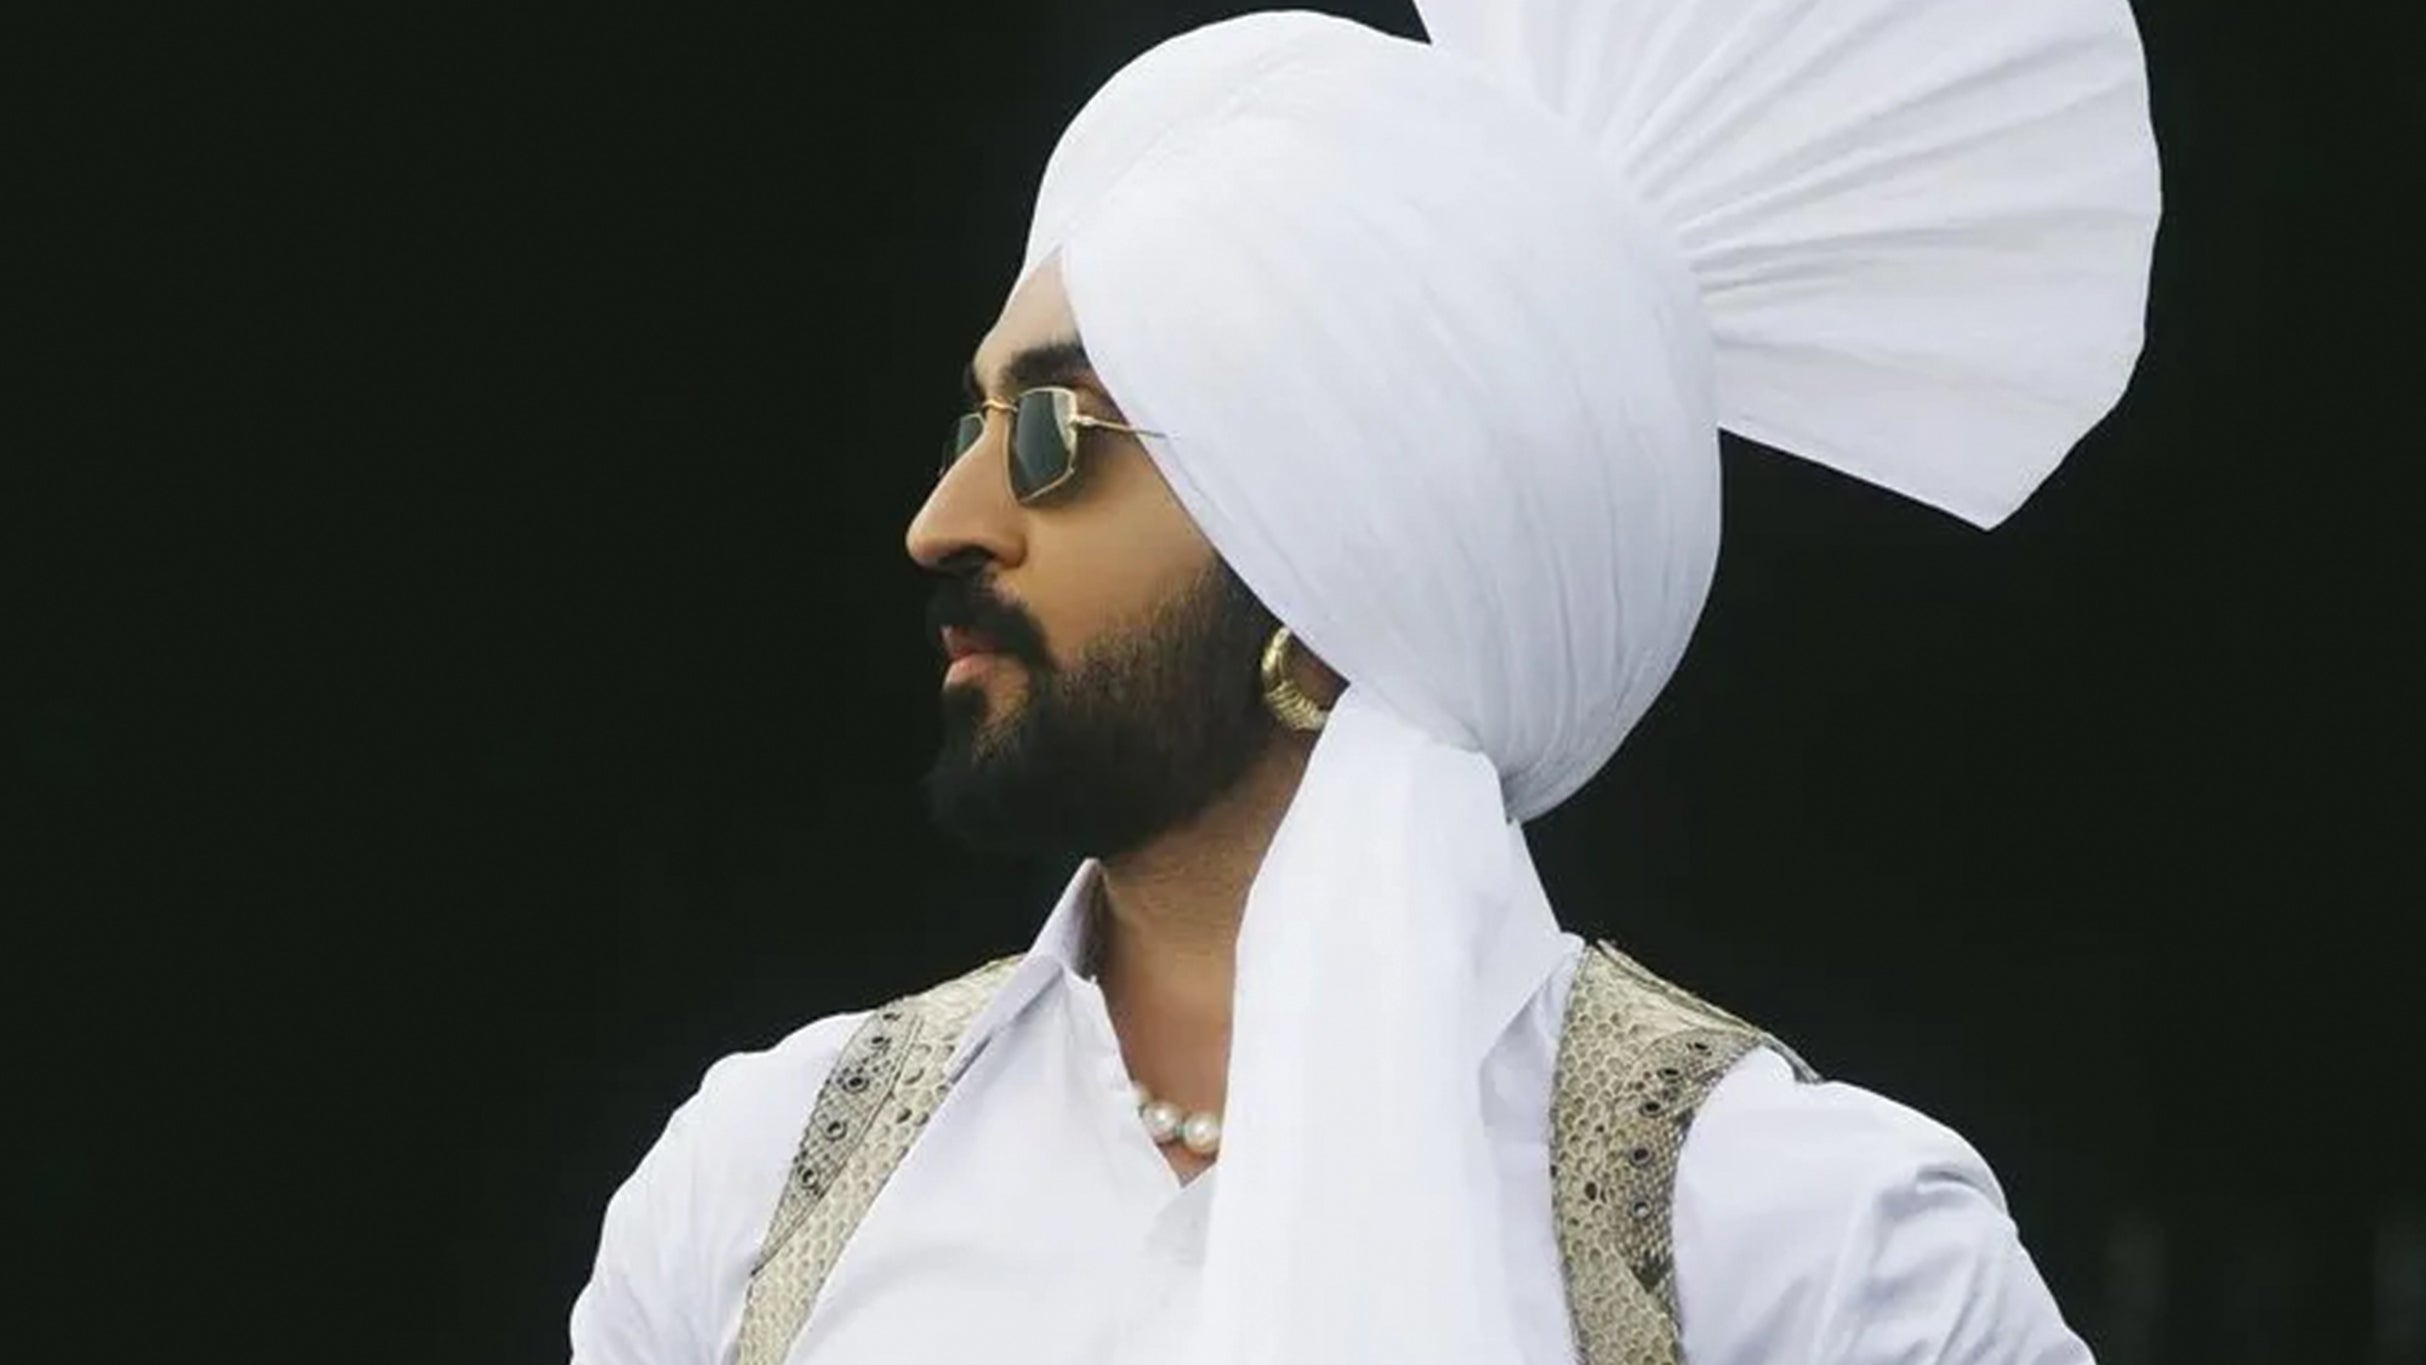 Diljit Dosanjh - DIL-LUMINATI TOUR presale code for performance tickets in Dallas, TX (American Airlines Center)